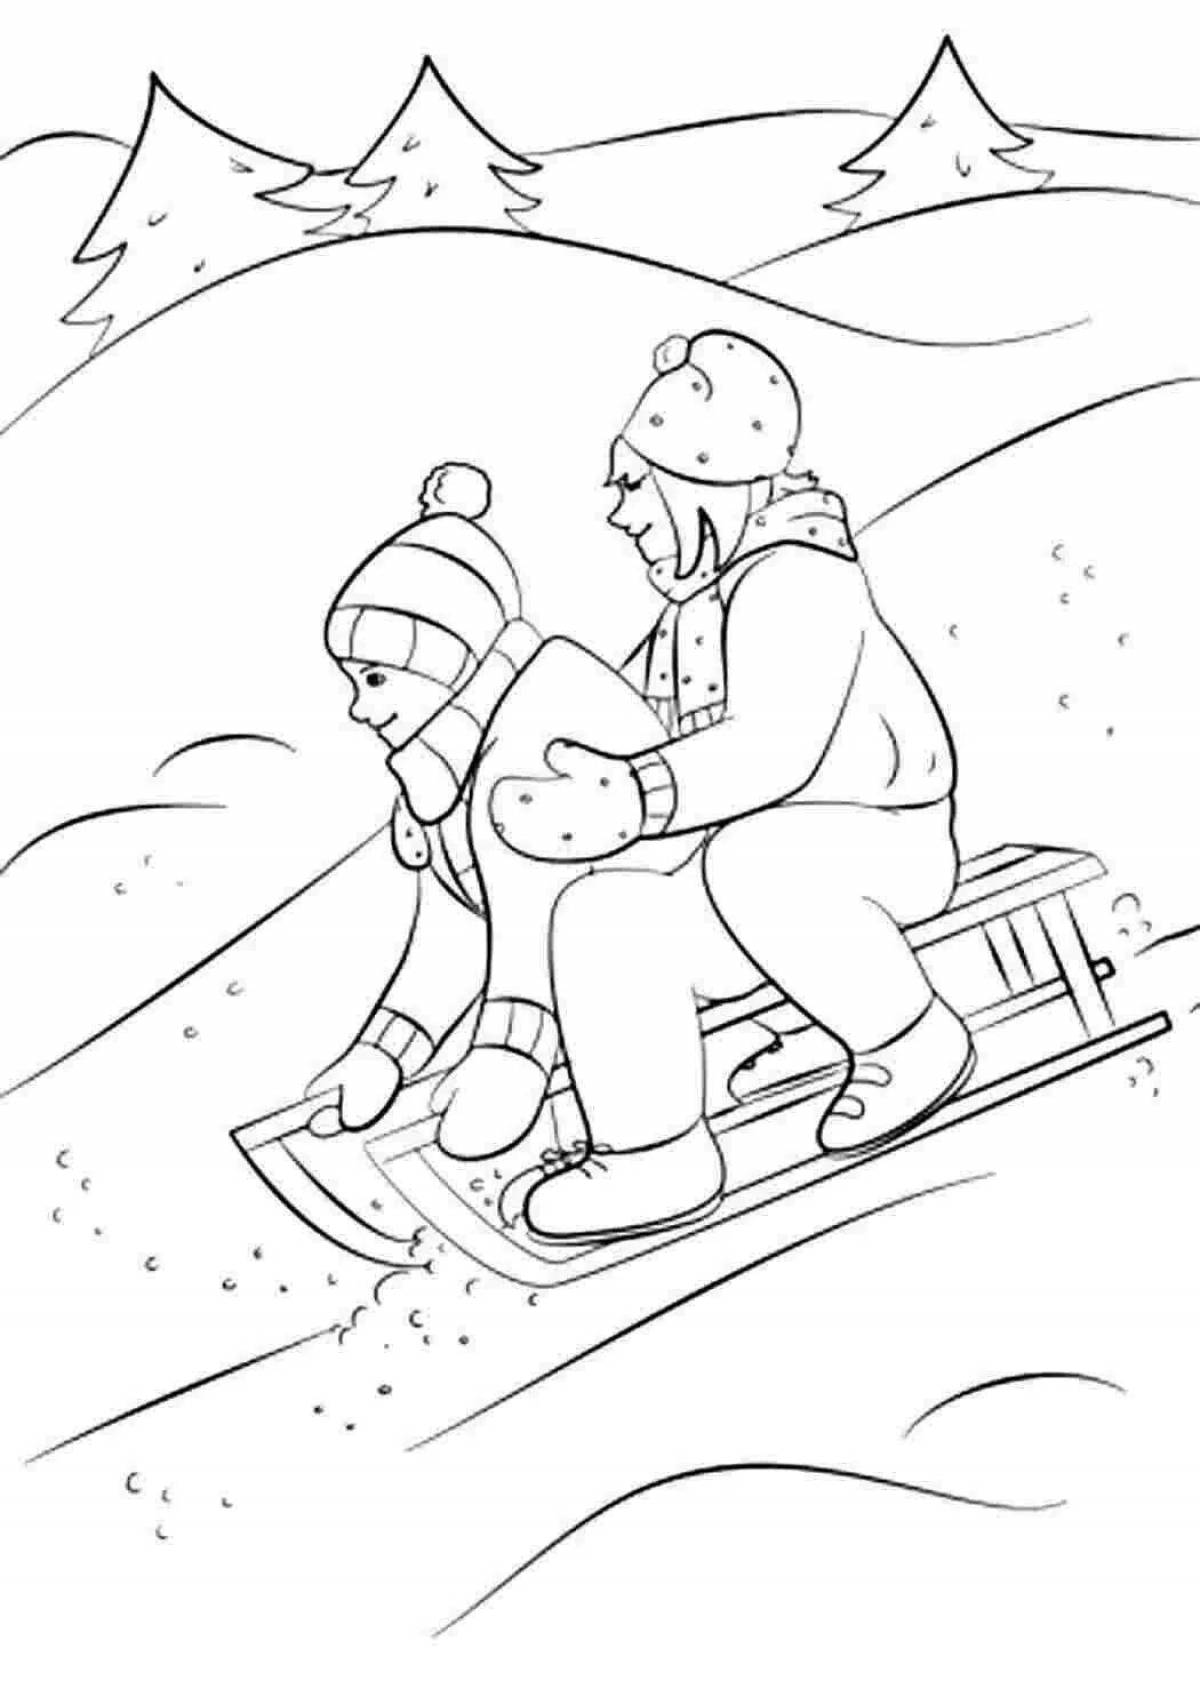 Excited children sledding down the mountain